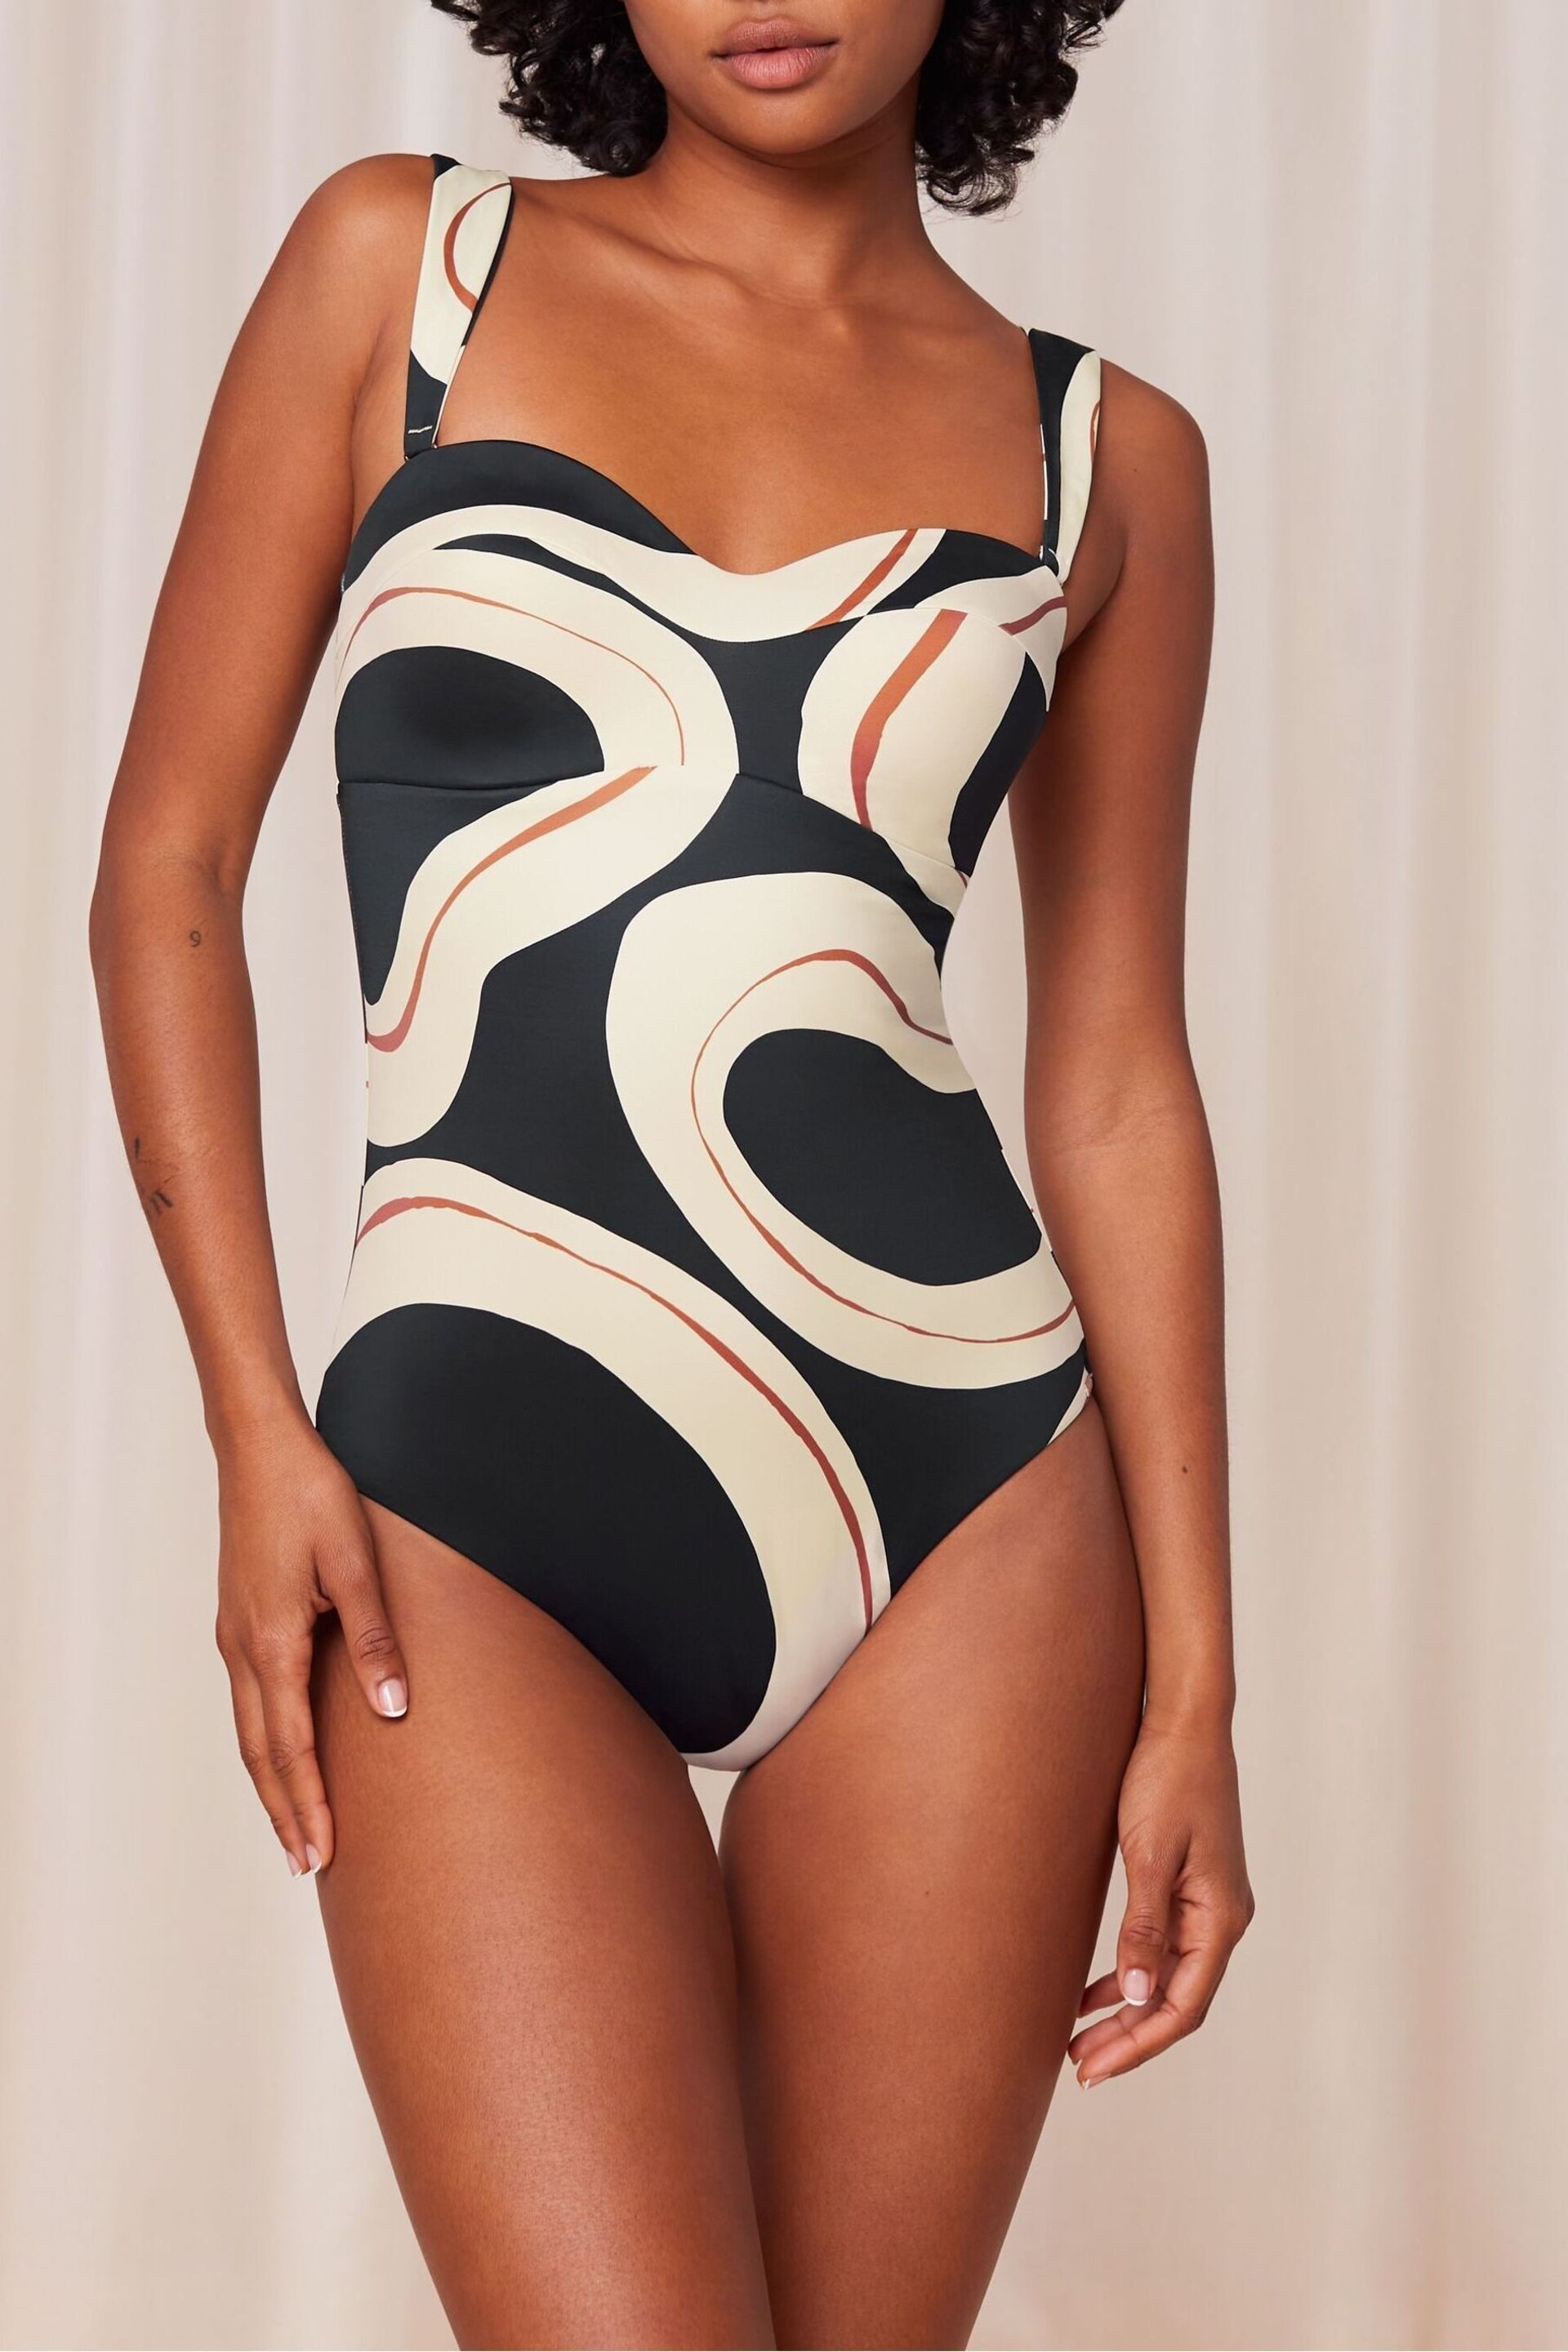 Triumph Summer Allure Padded Black Swimsuit - Image 1 of 4